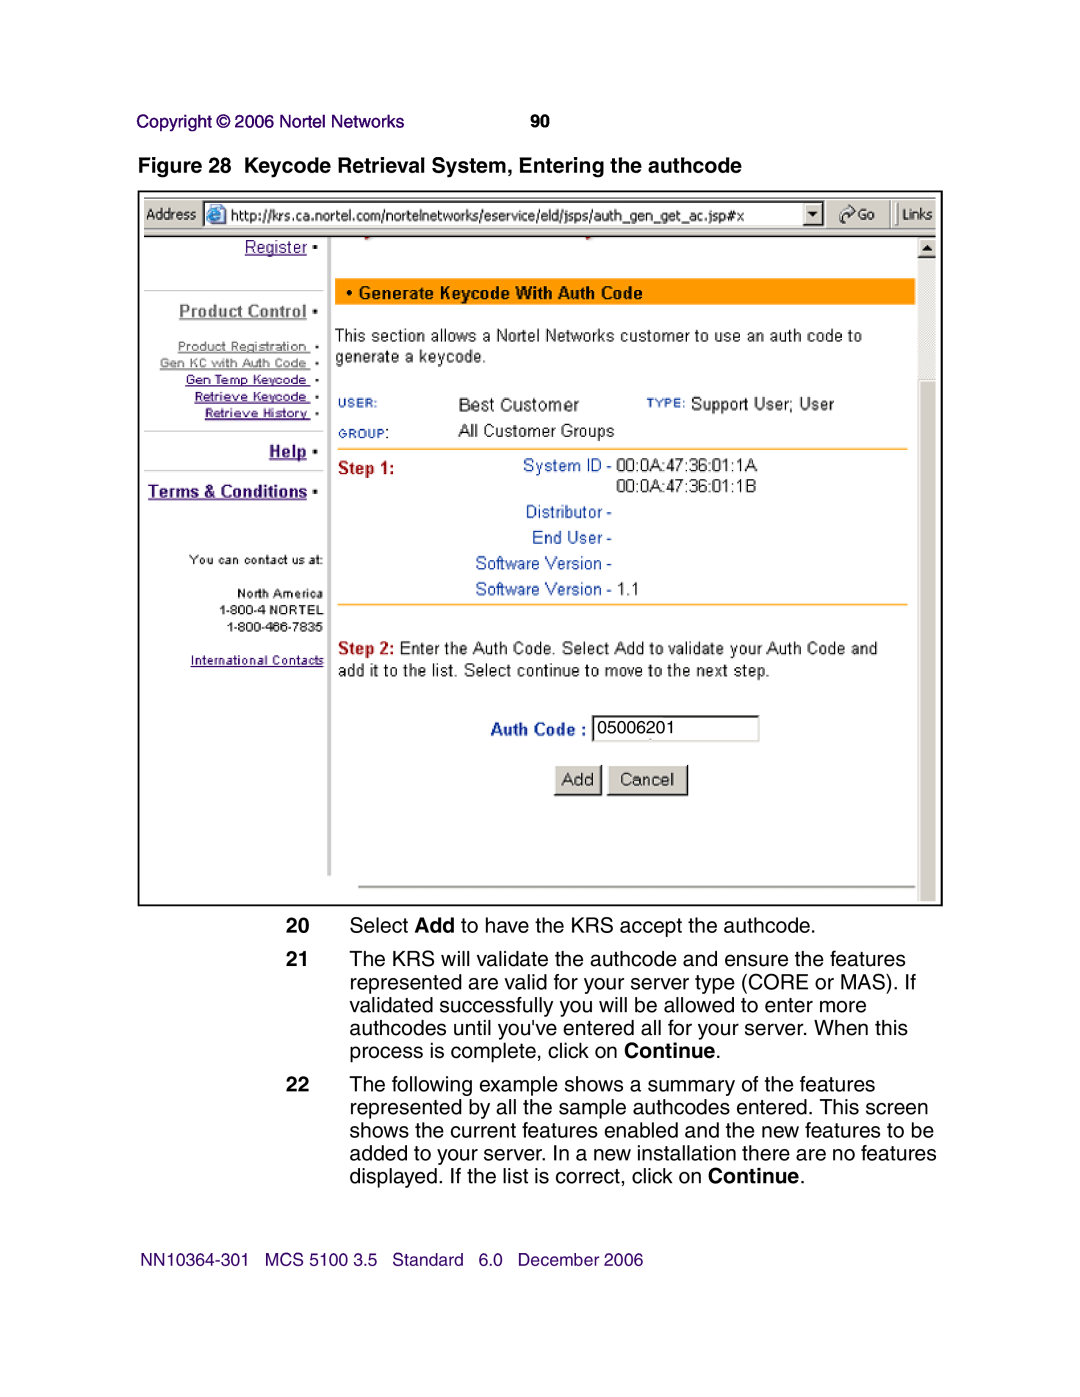 Nortel Networks V100 manual Keycode Retrieval System, Entering the authcode 